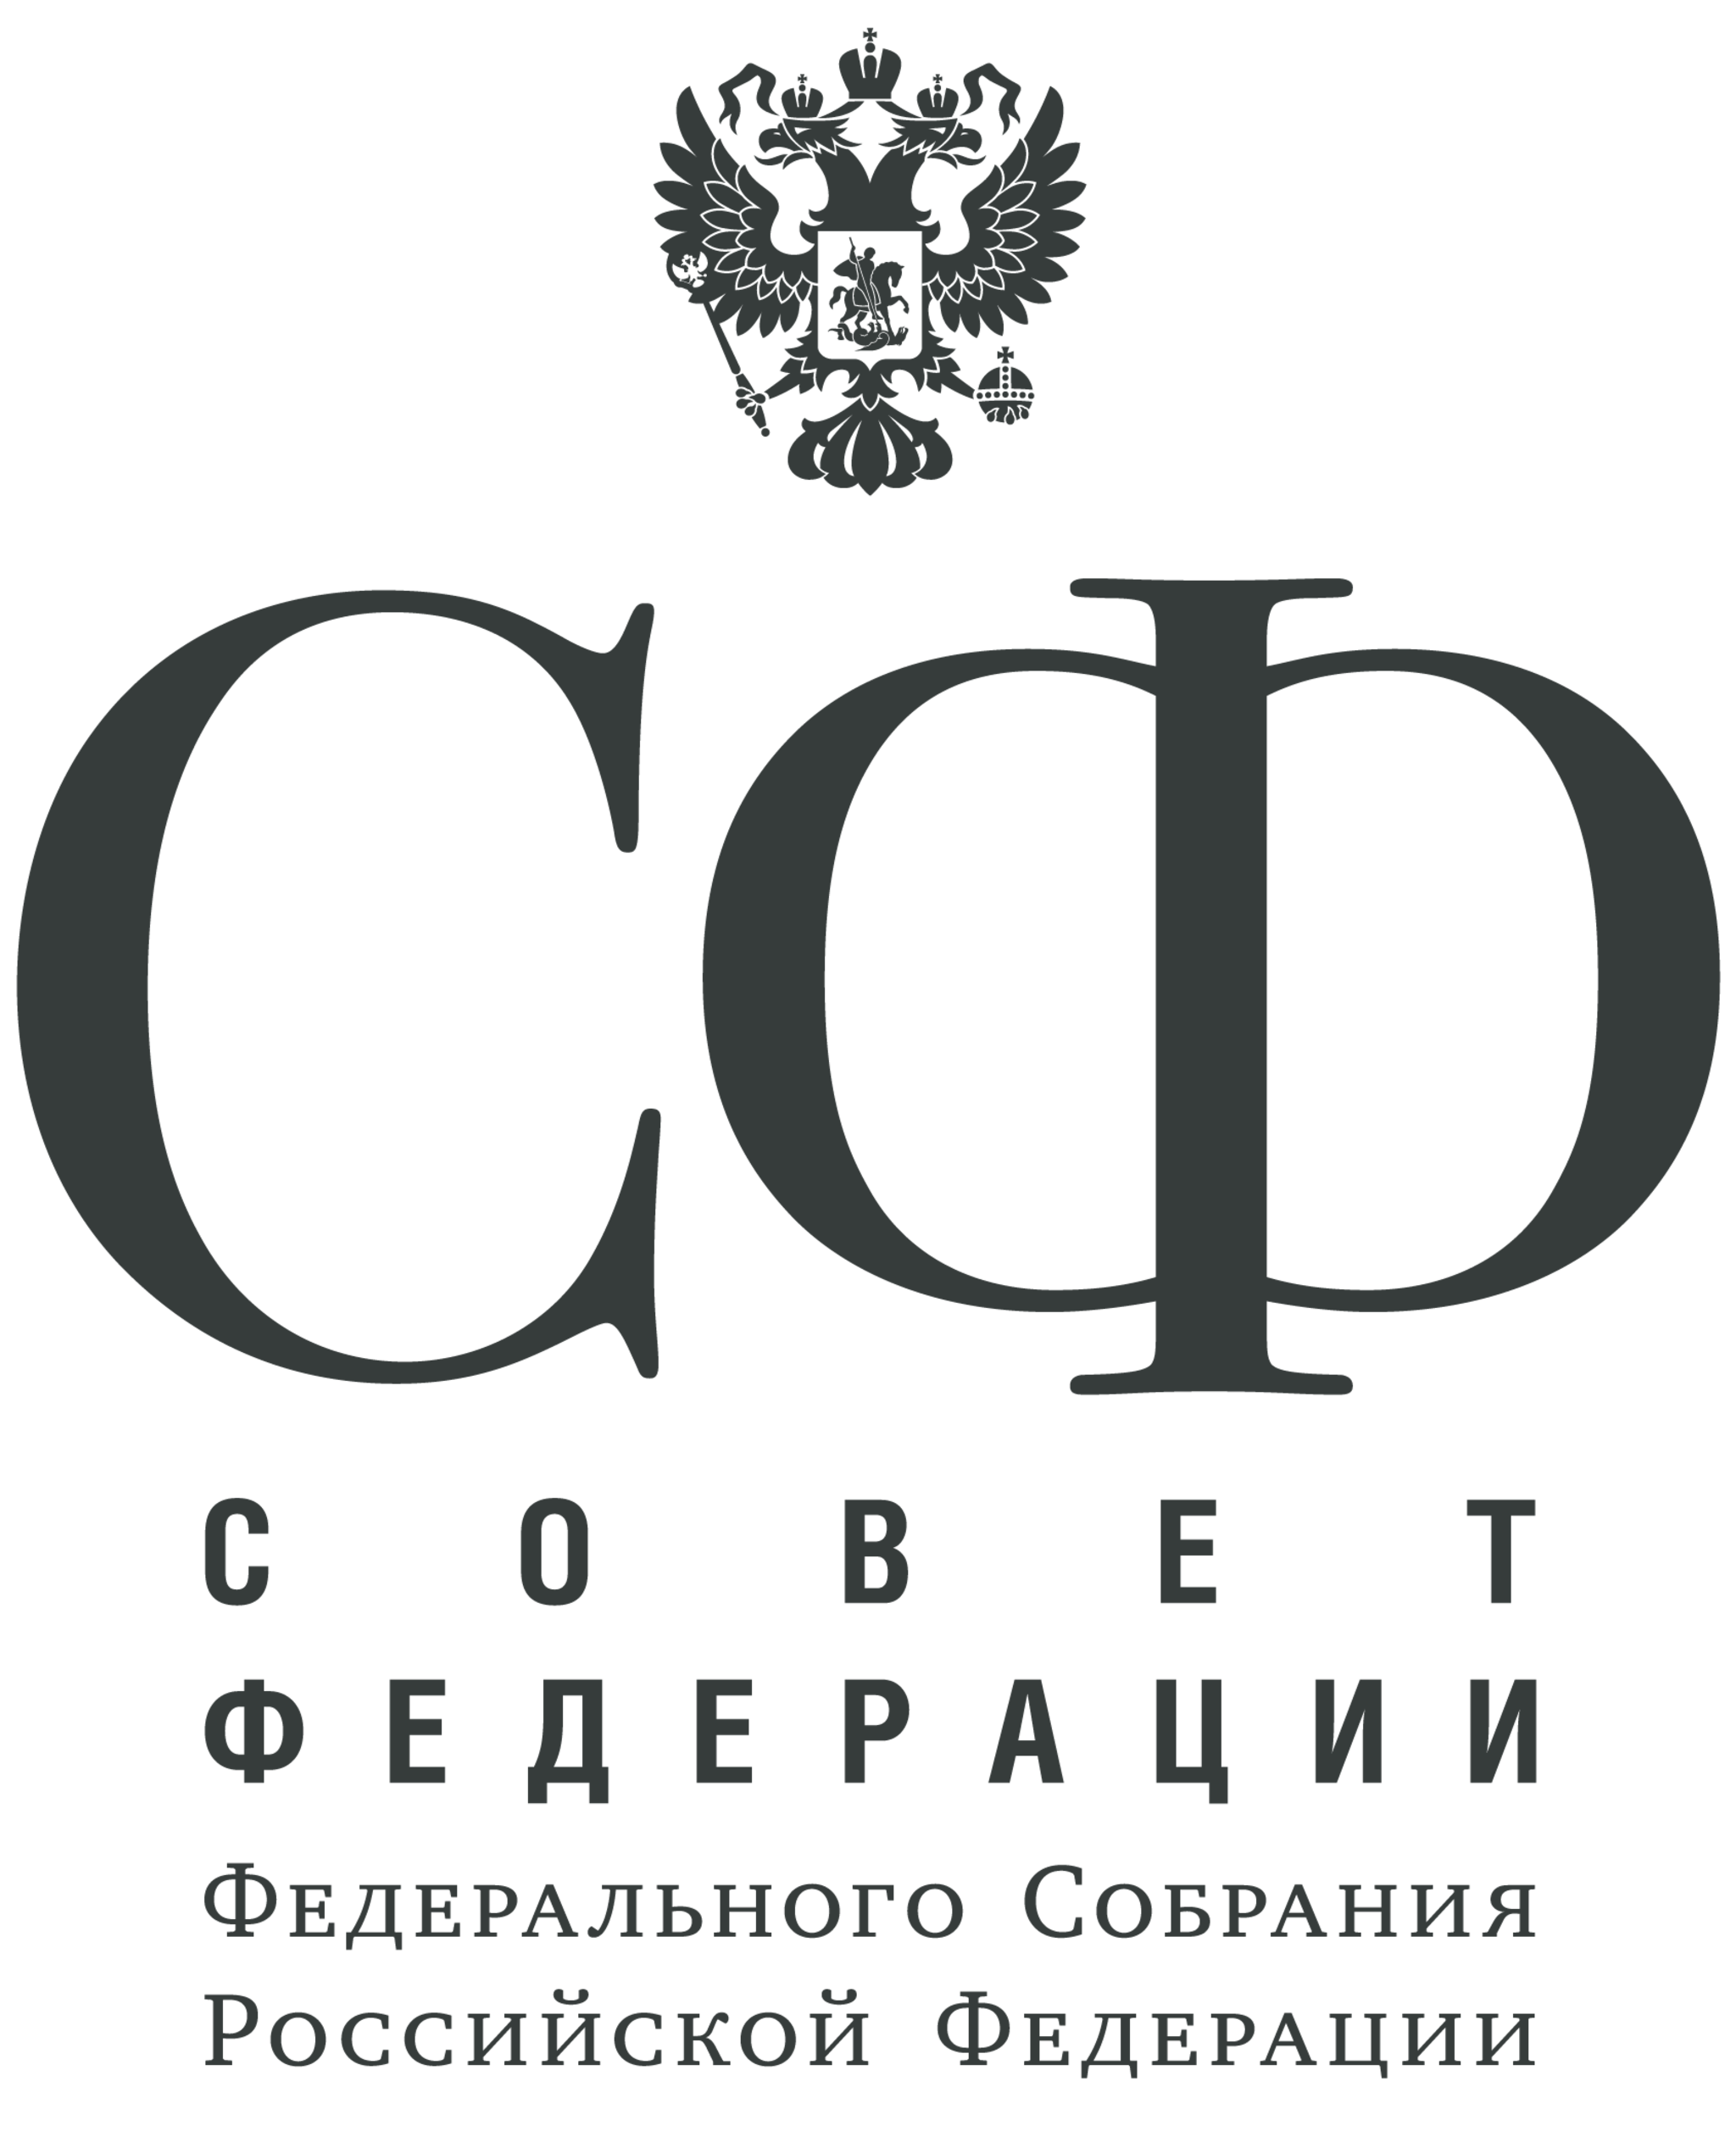 Файл:Emblem of the Federation Council of Russia.png